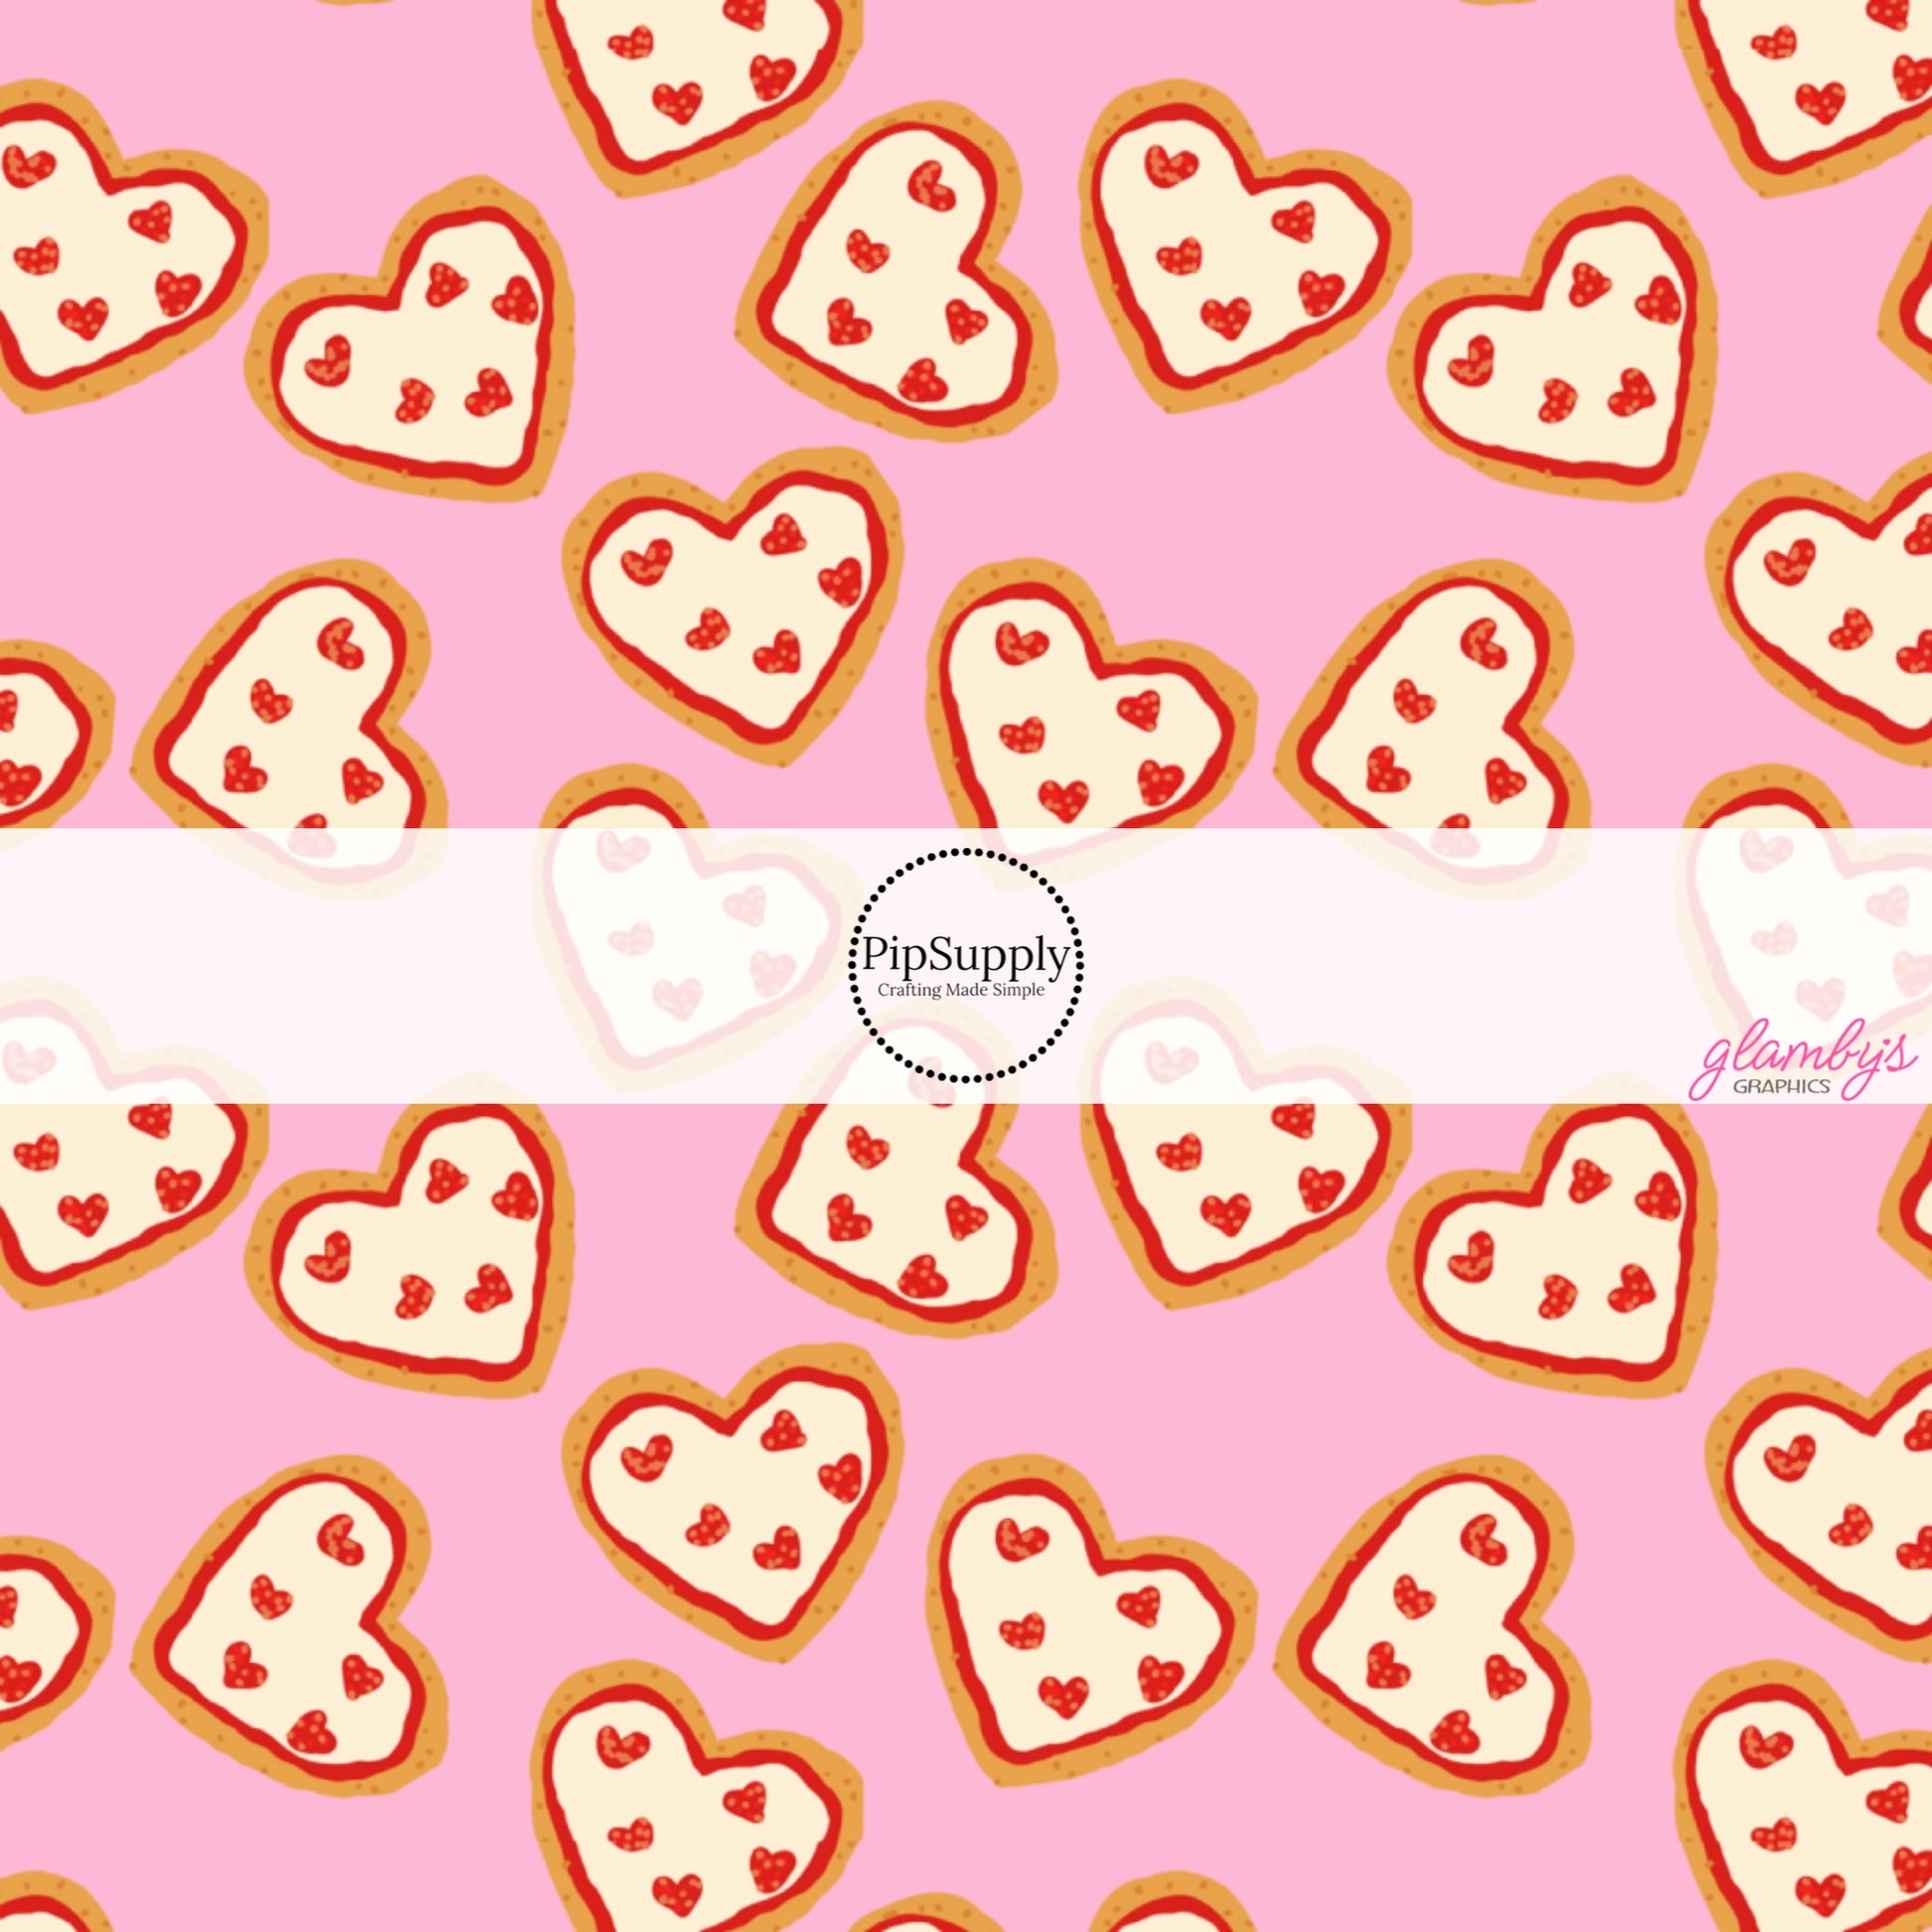 Tiny scattered heart pizzas on pink hair bow strips